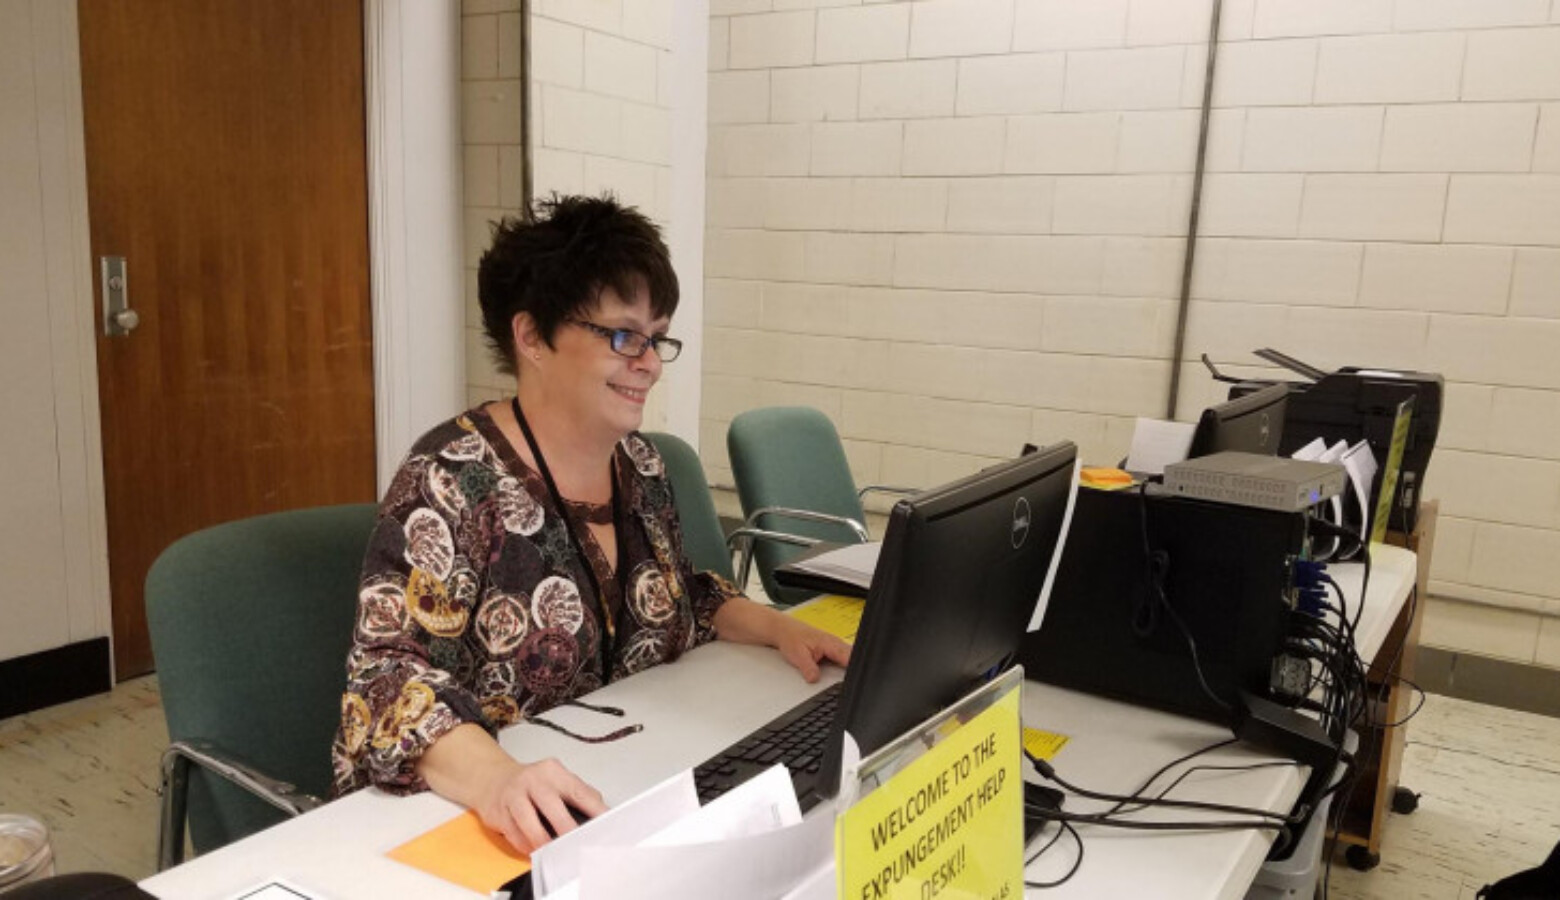 Julie Mennel is the expungement help desk manager for the Neighborhood Christian Legal Clinic in Indianapolis. She helps clients navigate the expungement process and seal their records from public view.